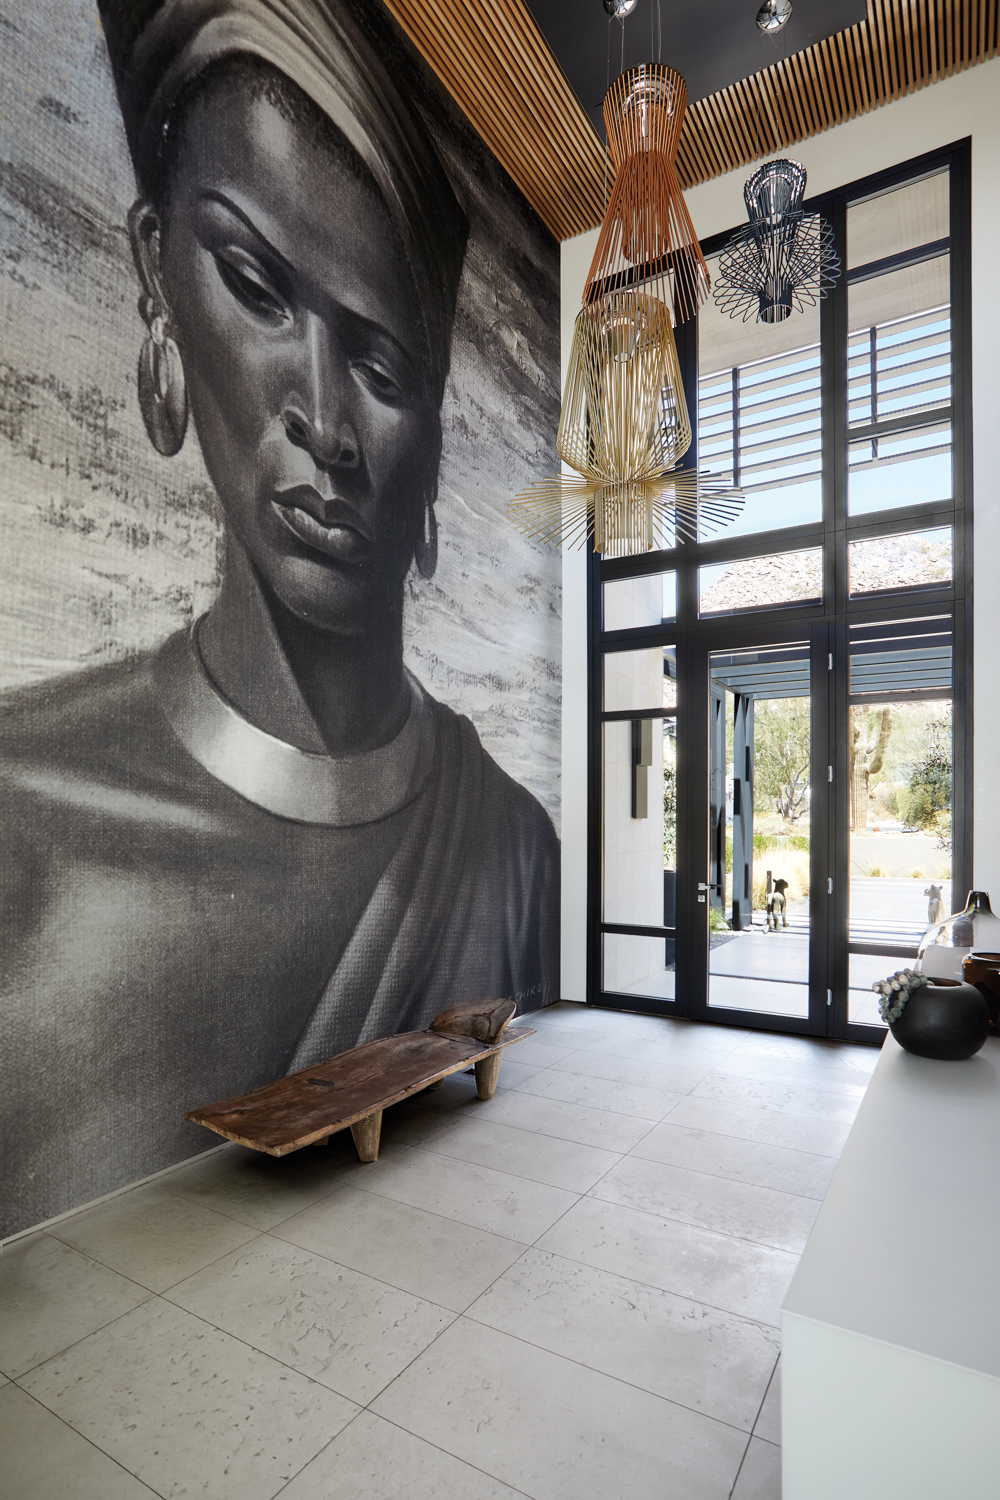 A double-story entryway with a floor-to-ceiling black-and-white mural of an African woman.